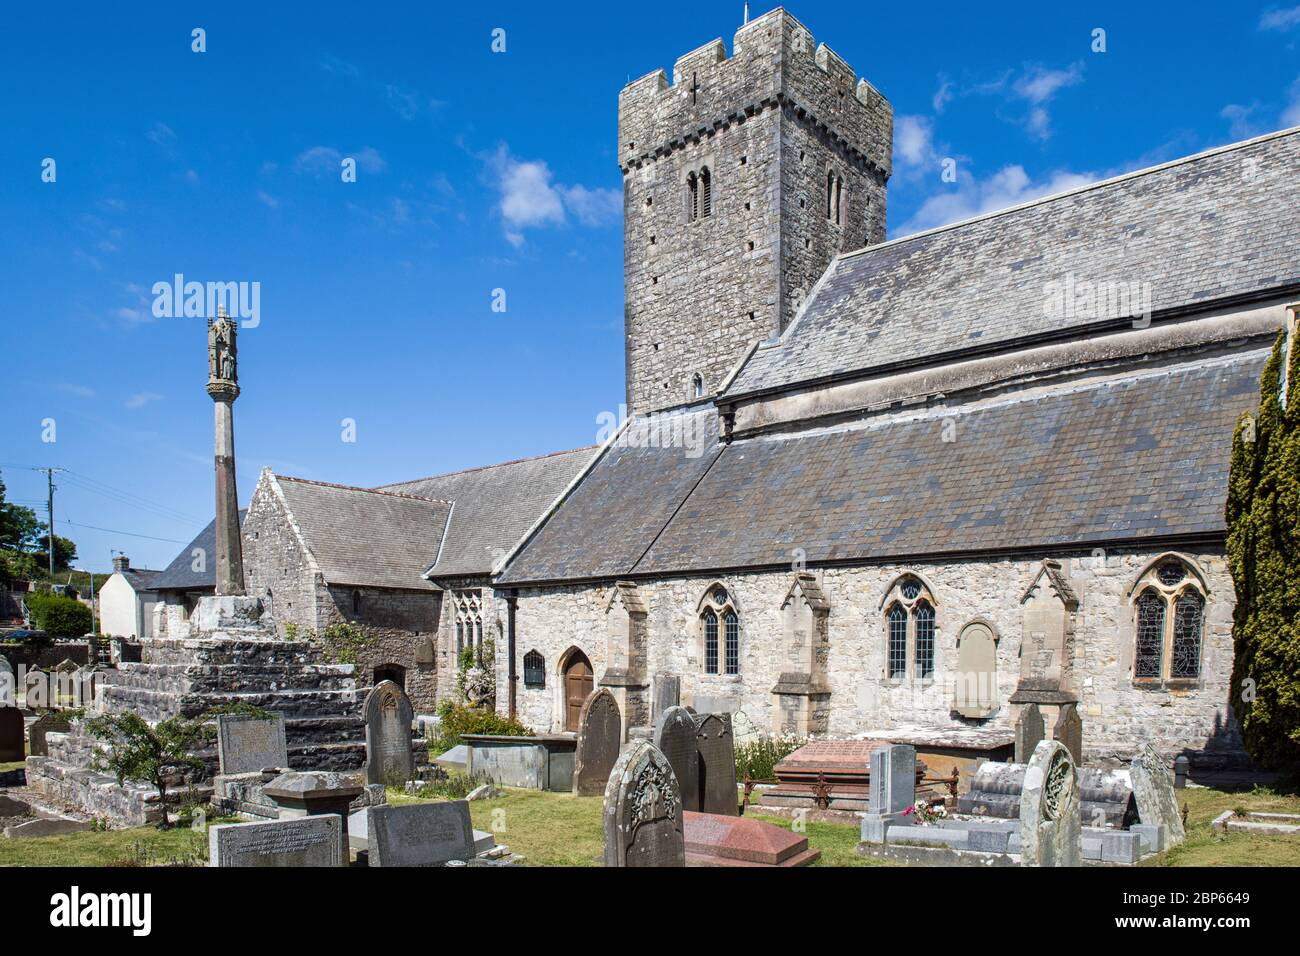 St Illtyd's Church in Llantwit Major. The church has considerable religious and nhistorical significance hence it's being listed as Grade 1 Listed. Stock Photo